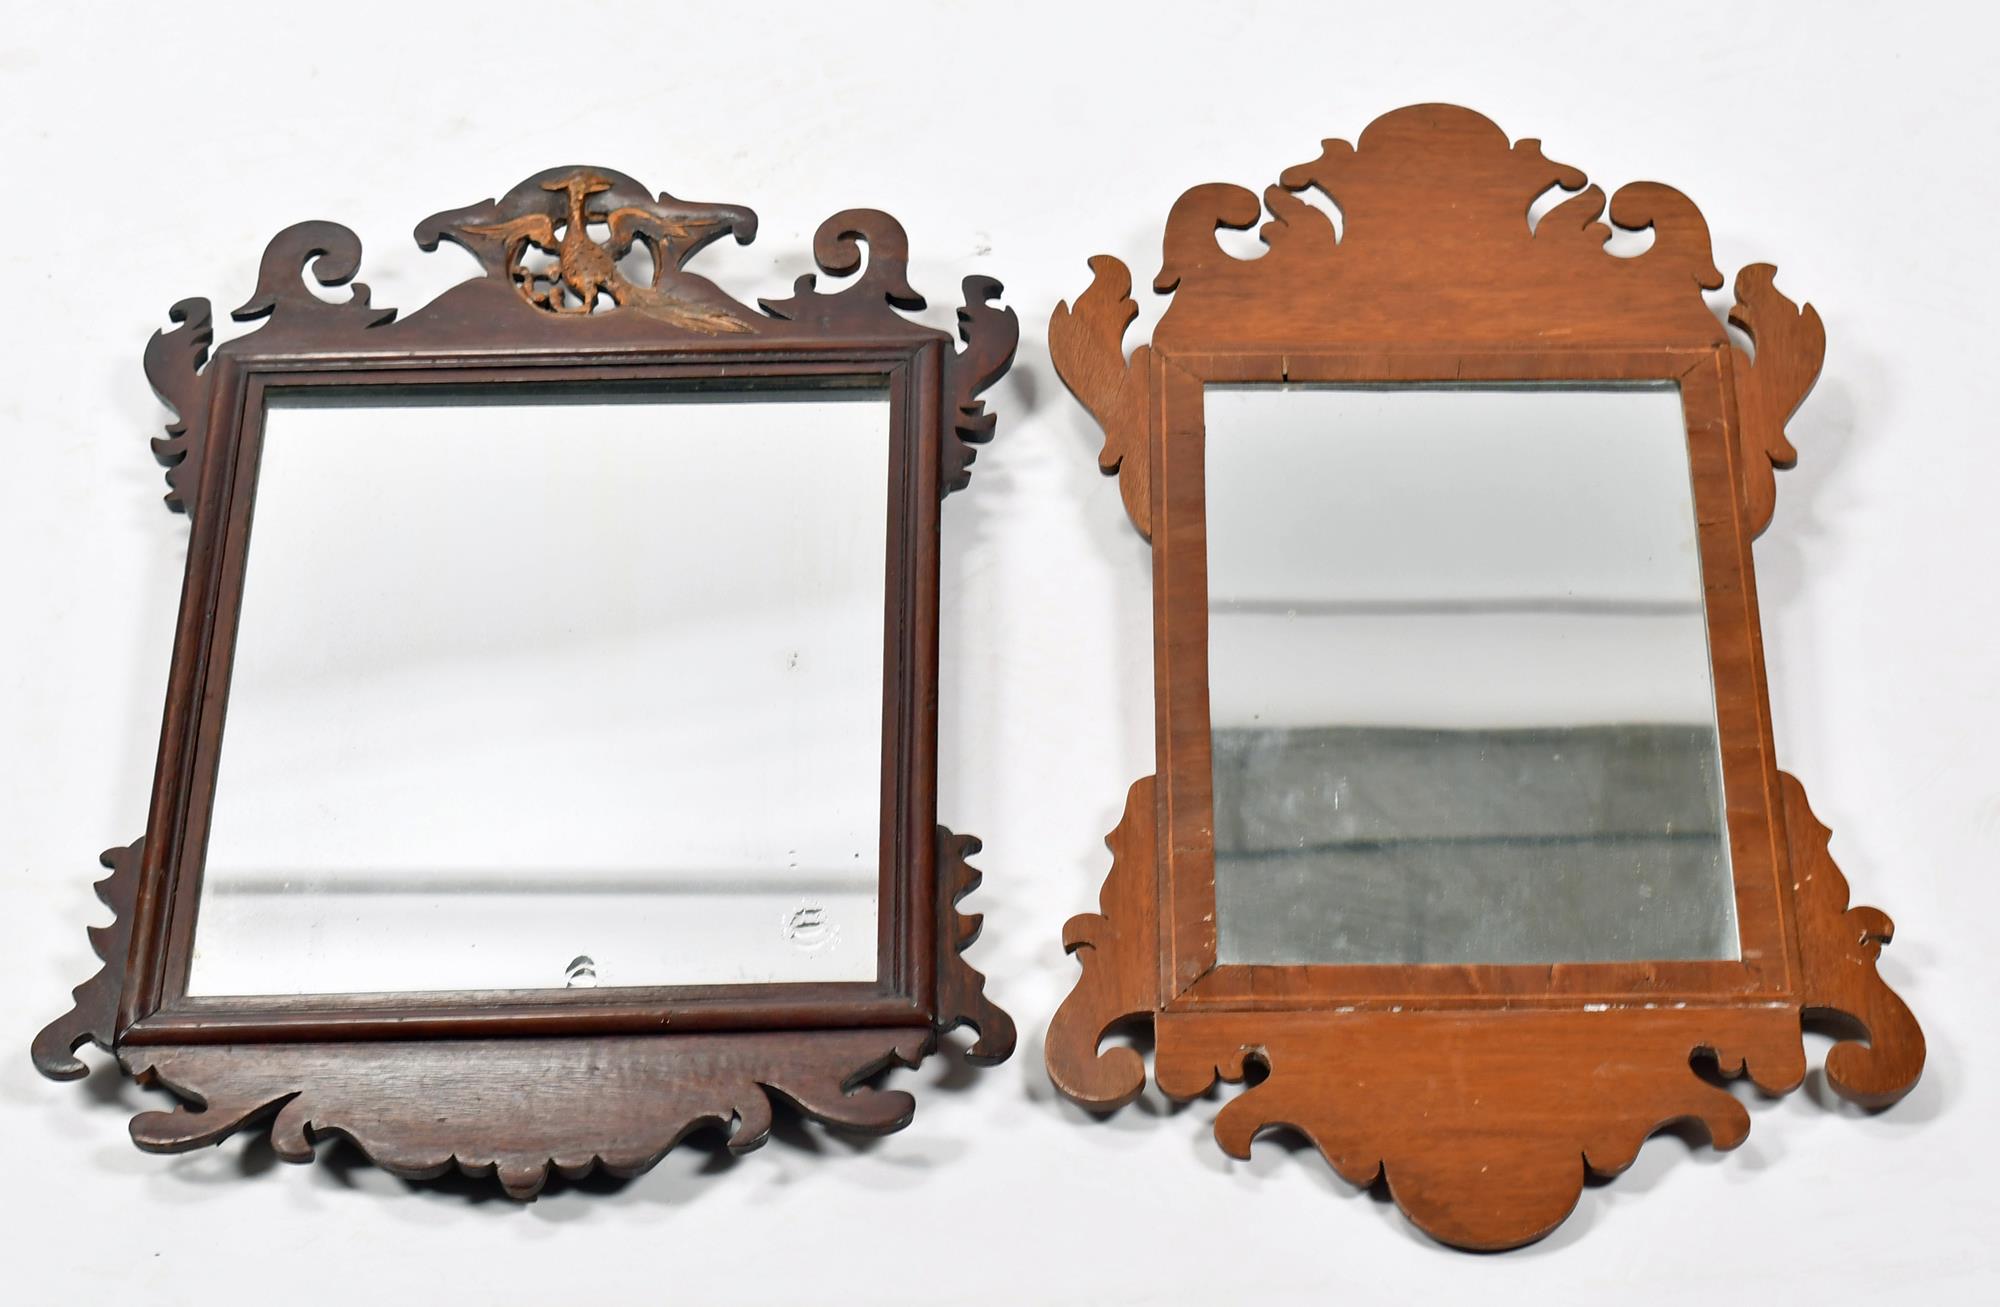 TWO PERIOD CHIPPENDALE WALL MIRRORS.